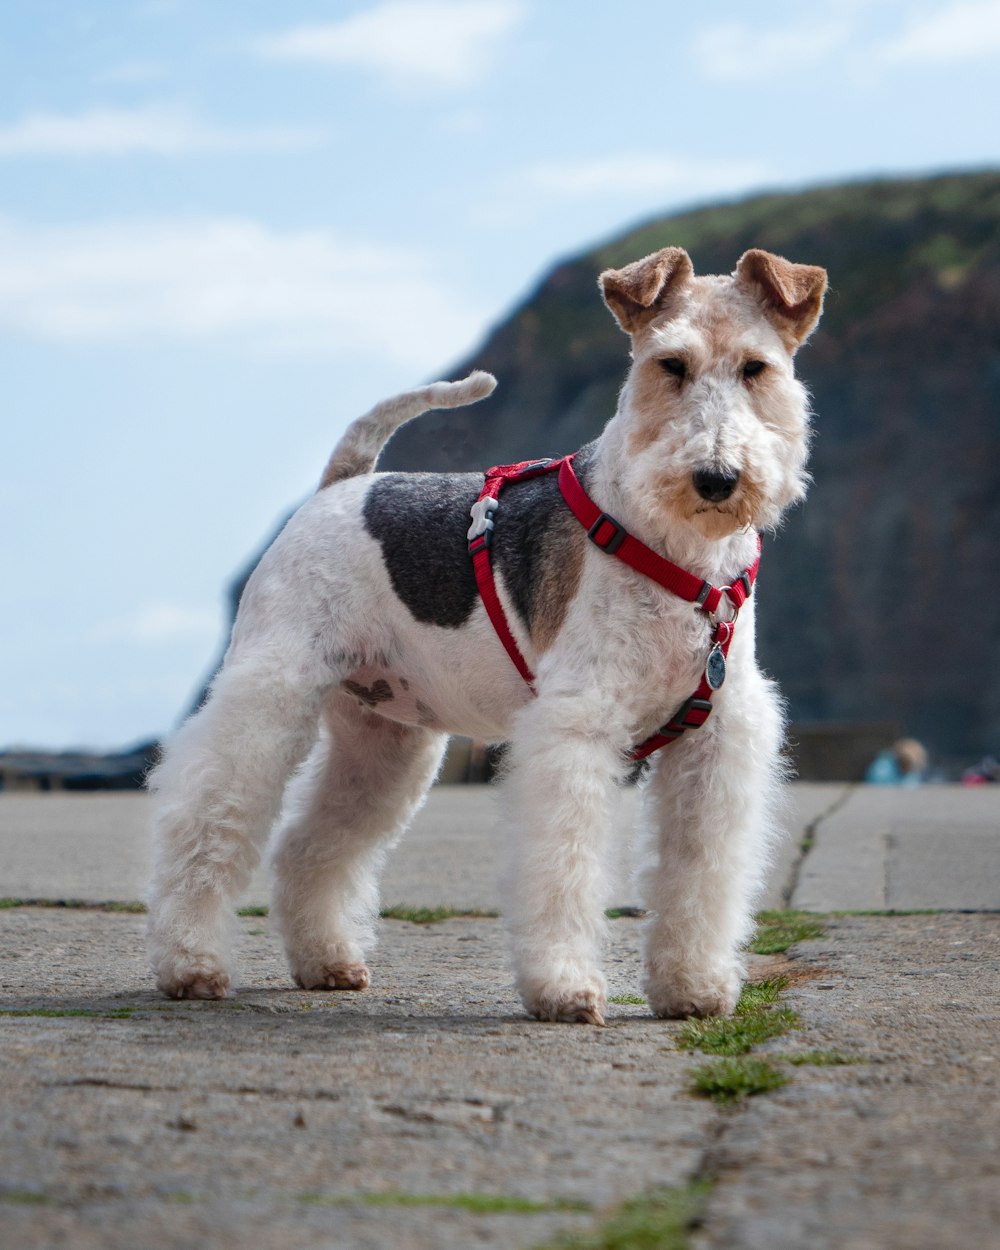 a small white dog wearing a red harness